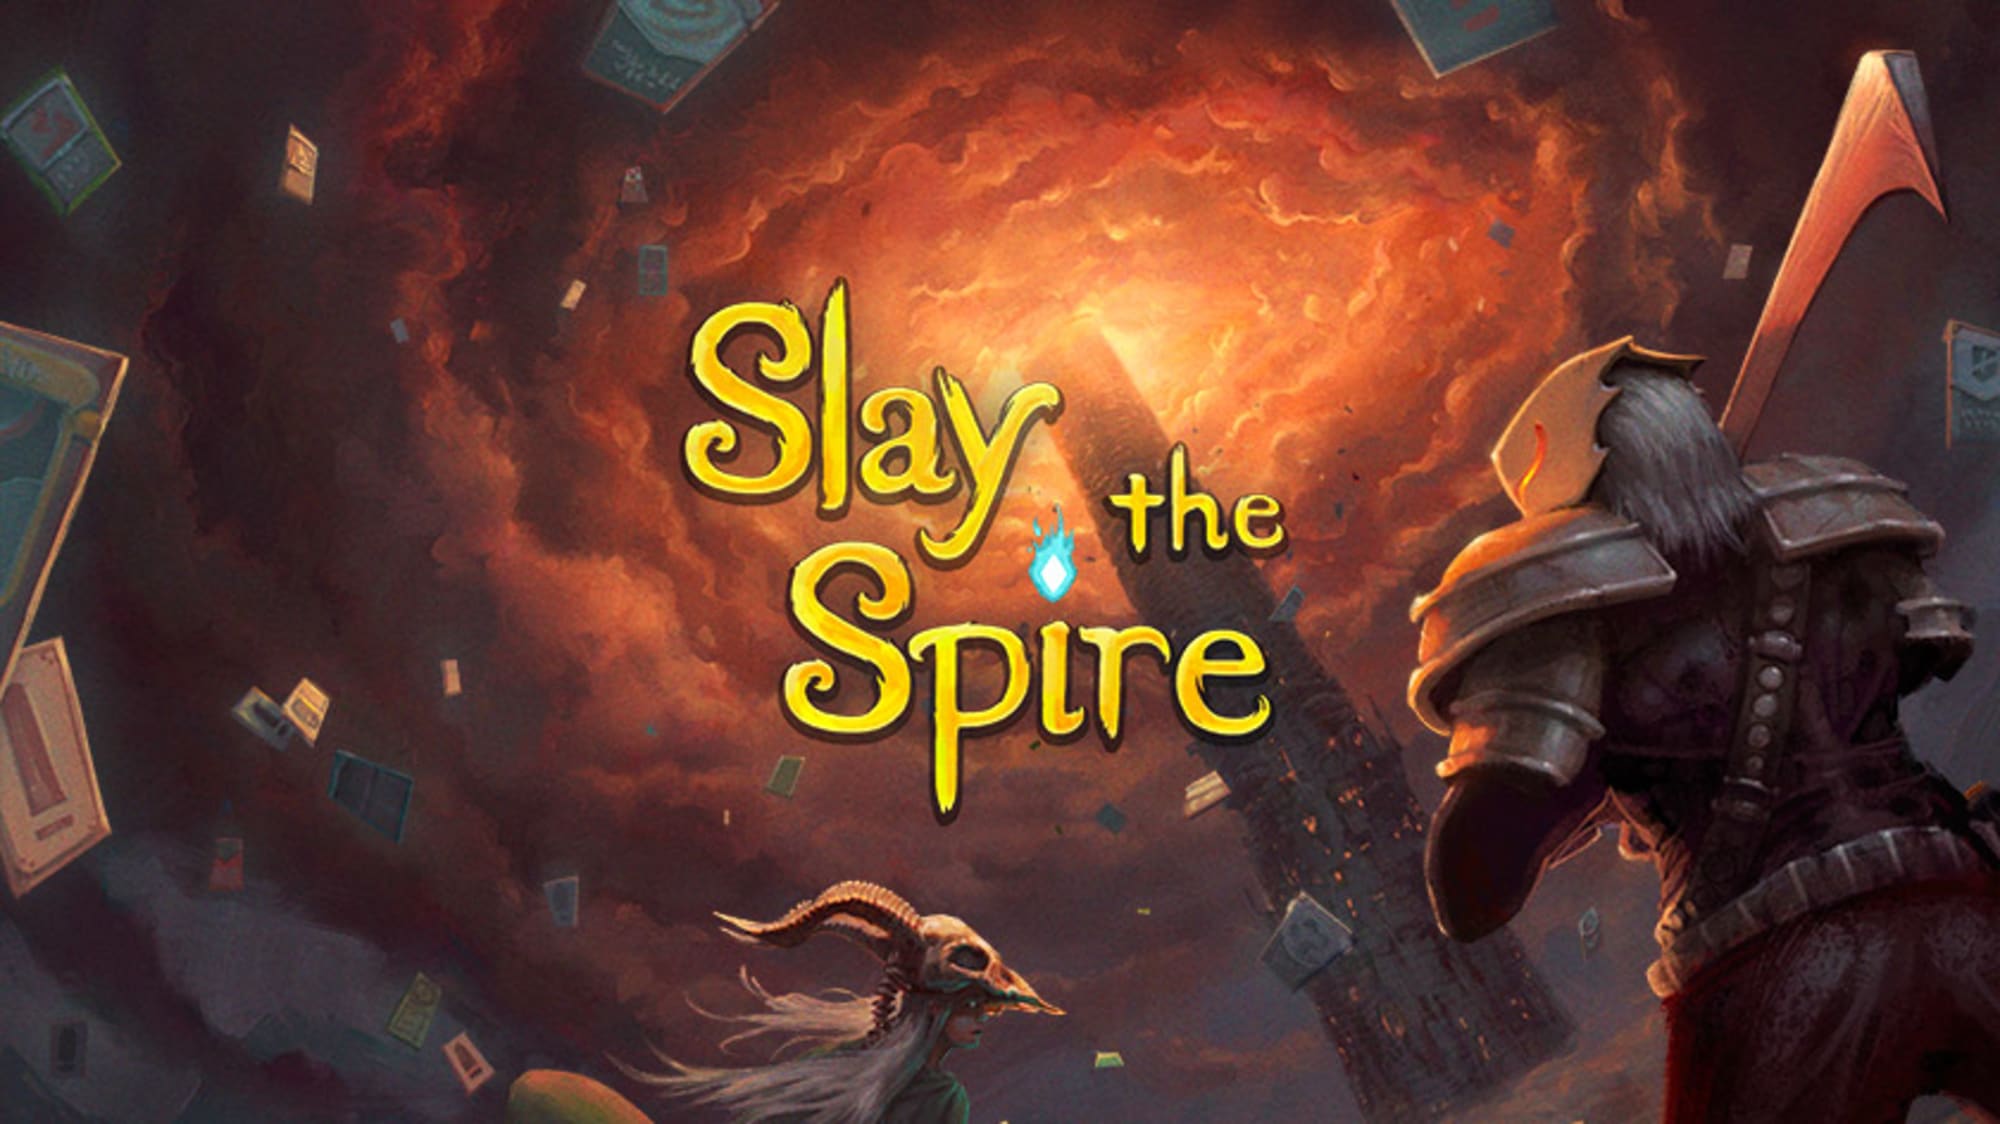 slay the spire characters